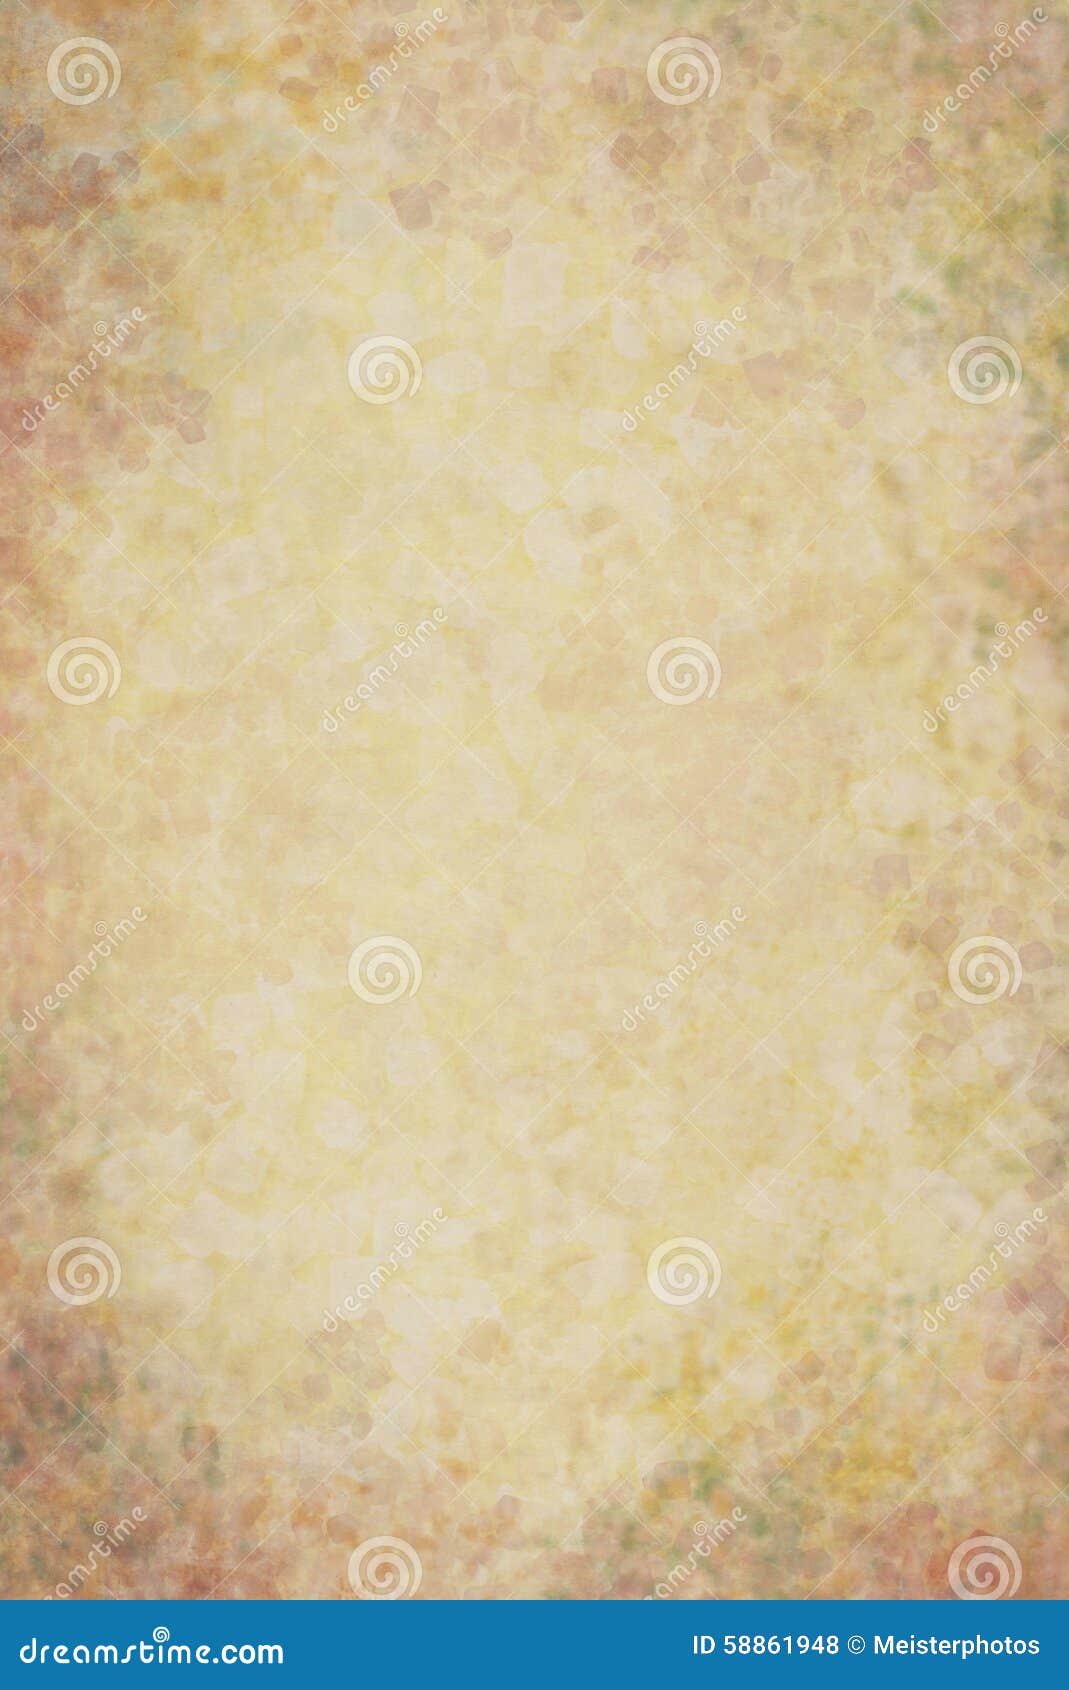 warm earth tone textured background.